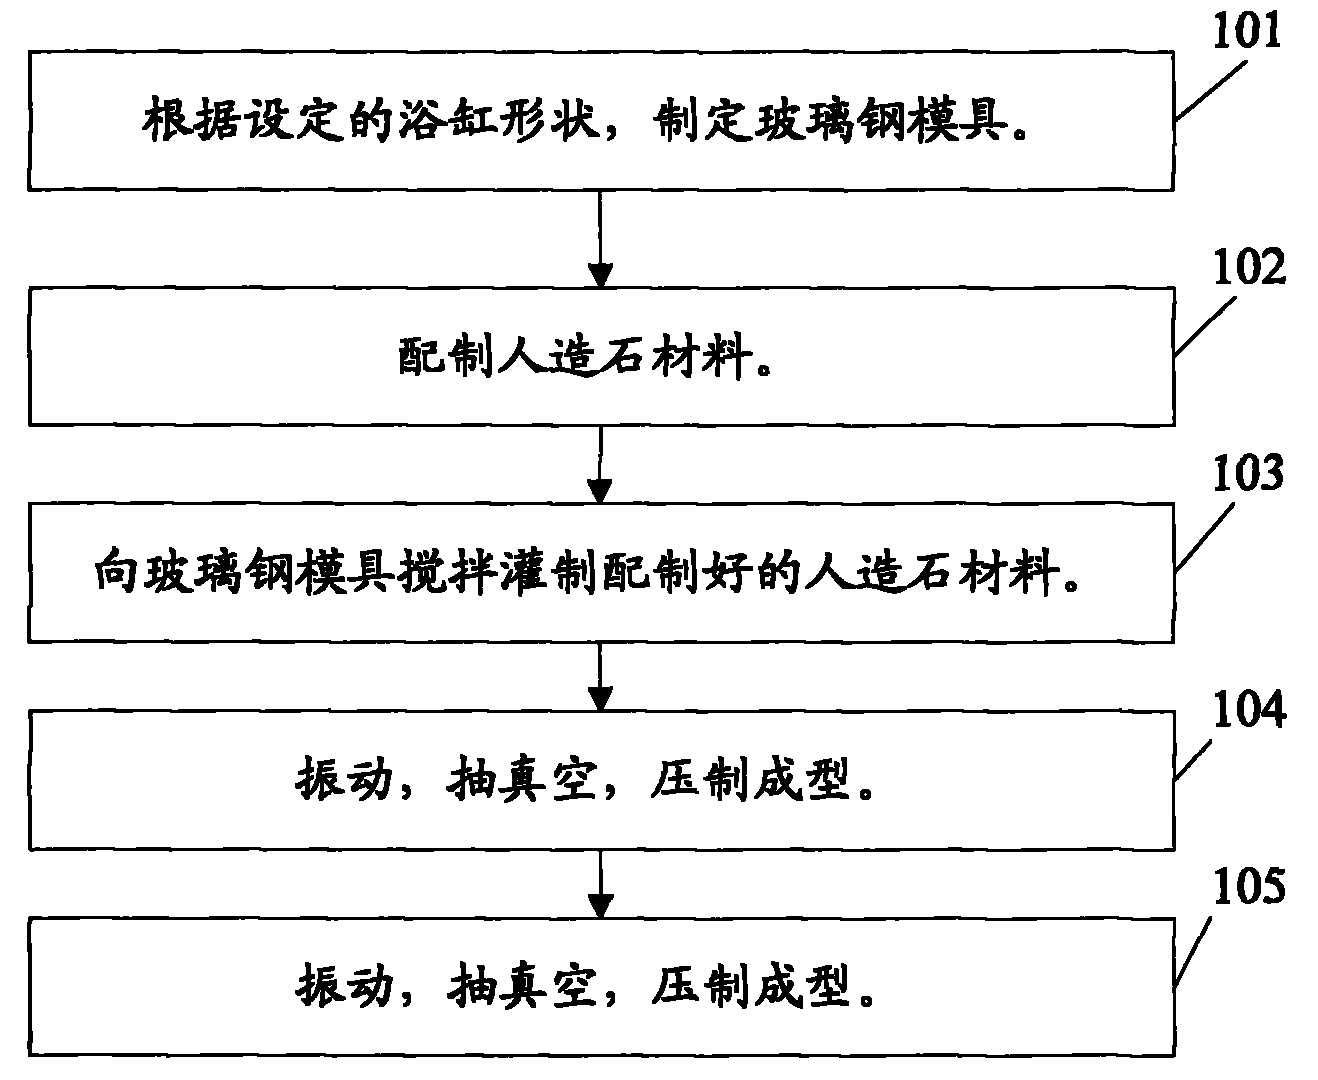 Artificial stone bathtub and method for manufacturing same